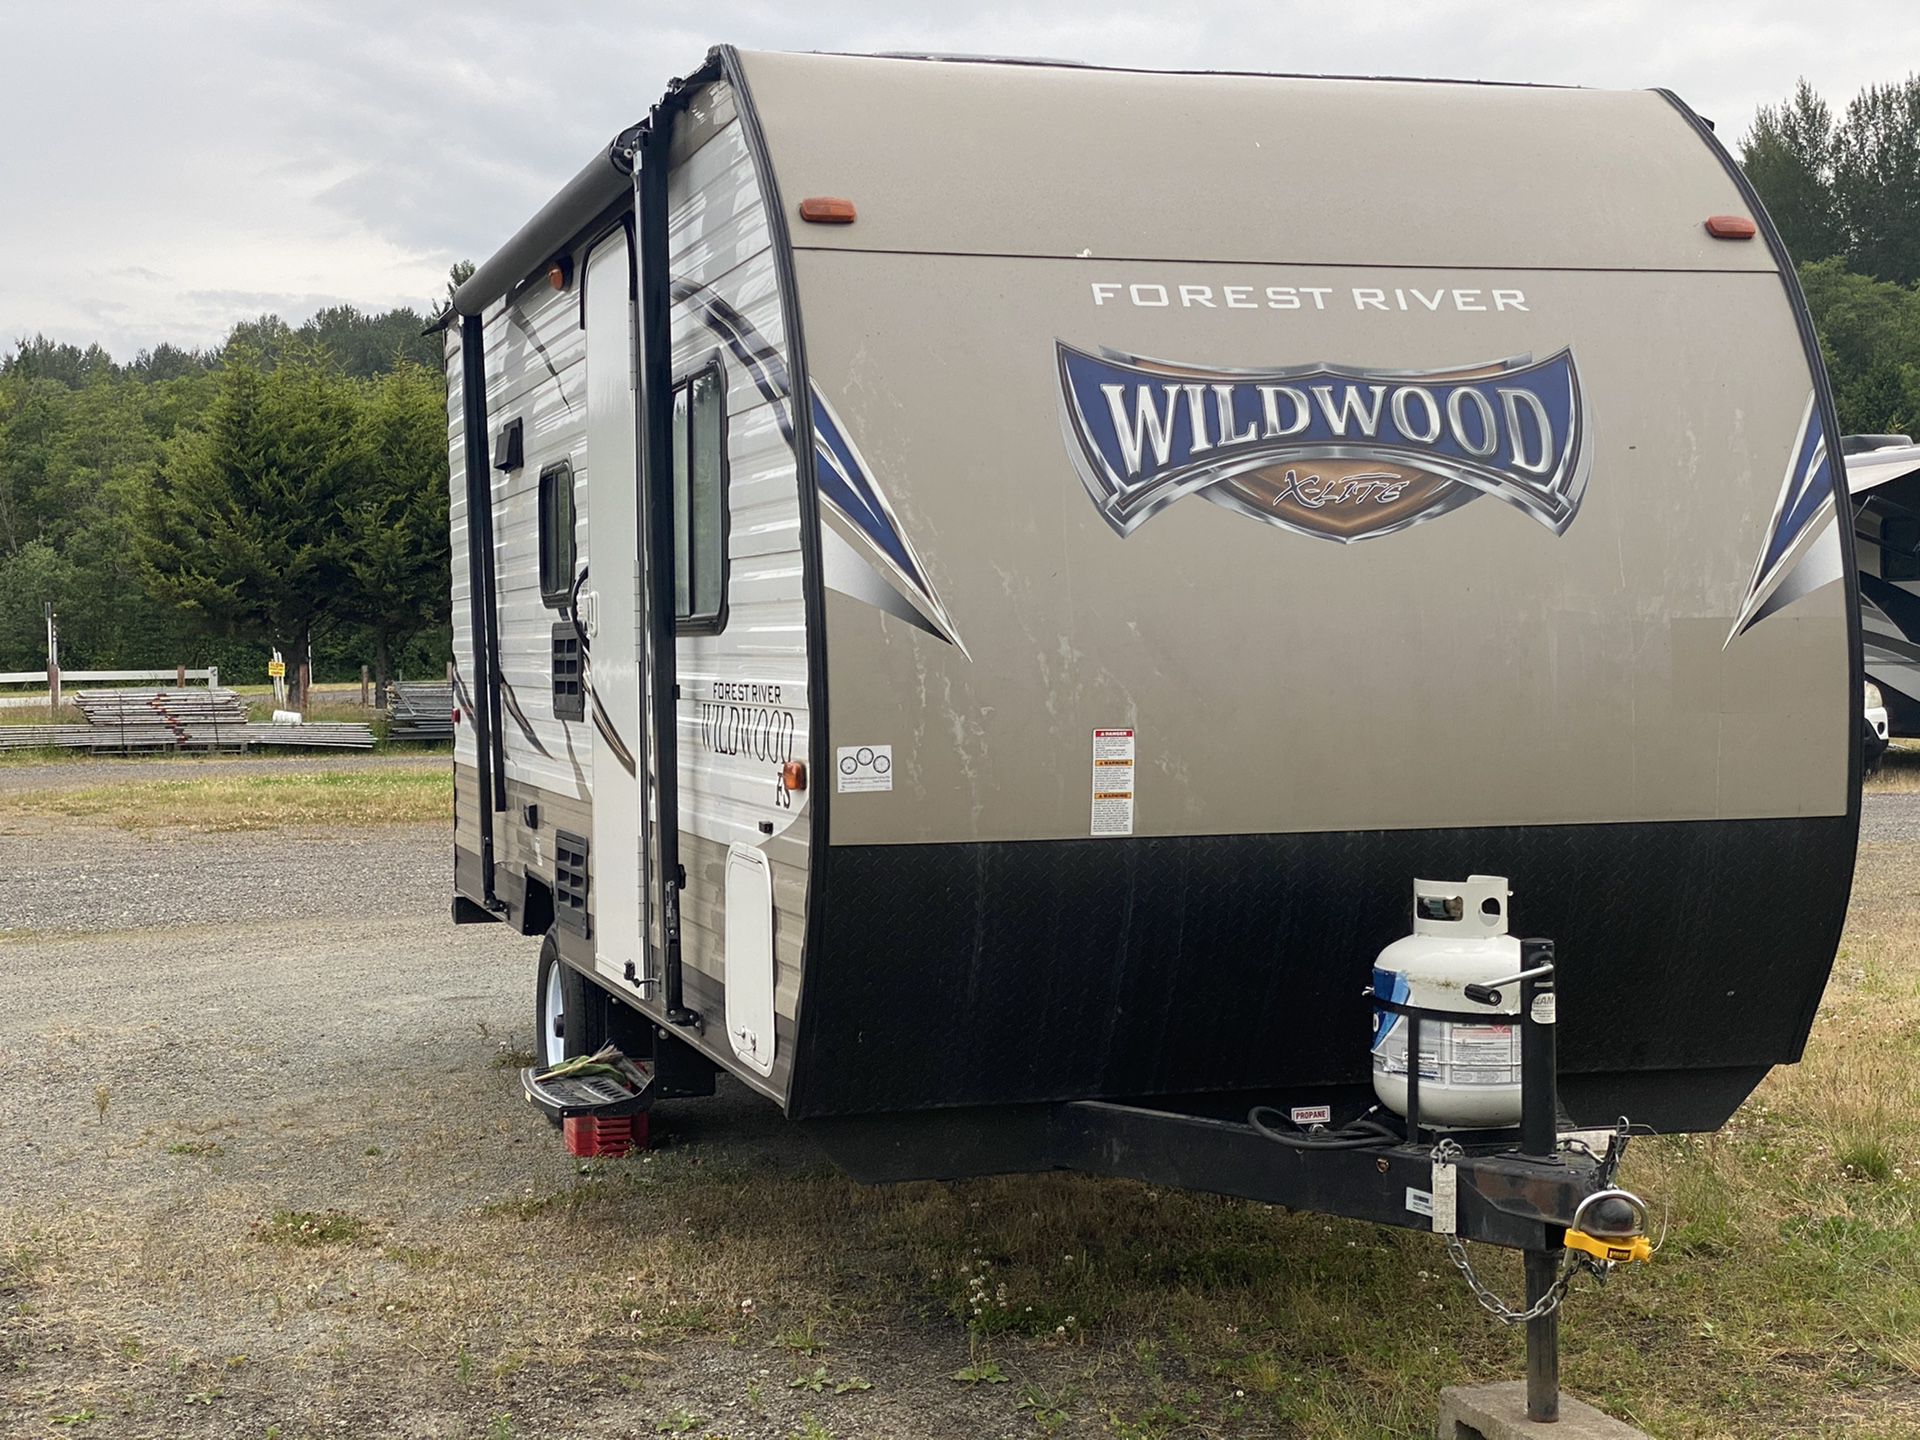 Forest river wildwood travel trailer